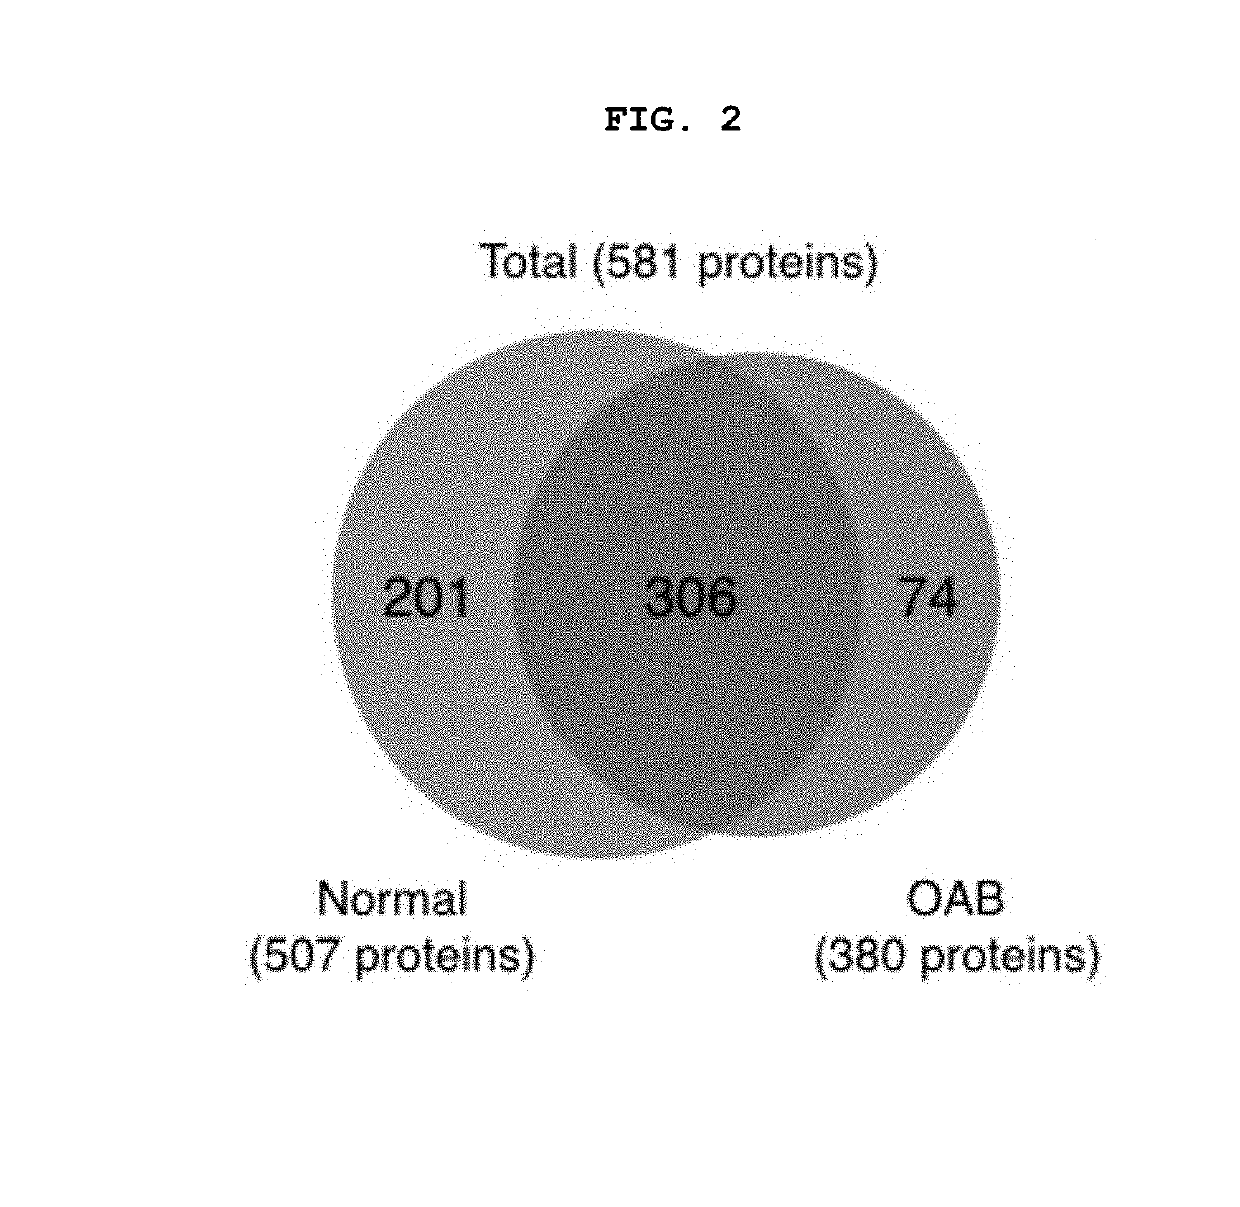 Biomarker for diagnosing overactive bladder disease and screening method of therapeutic agents using the same